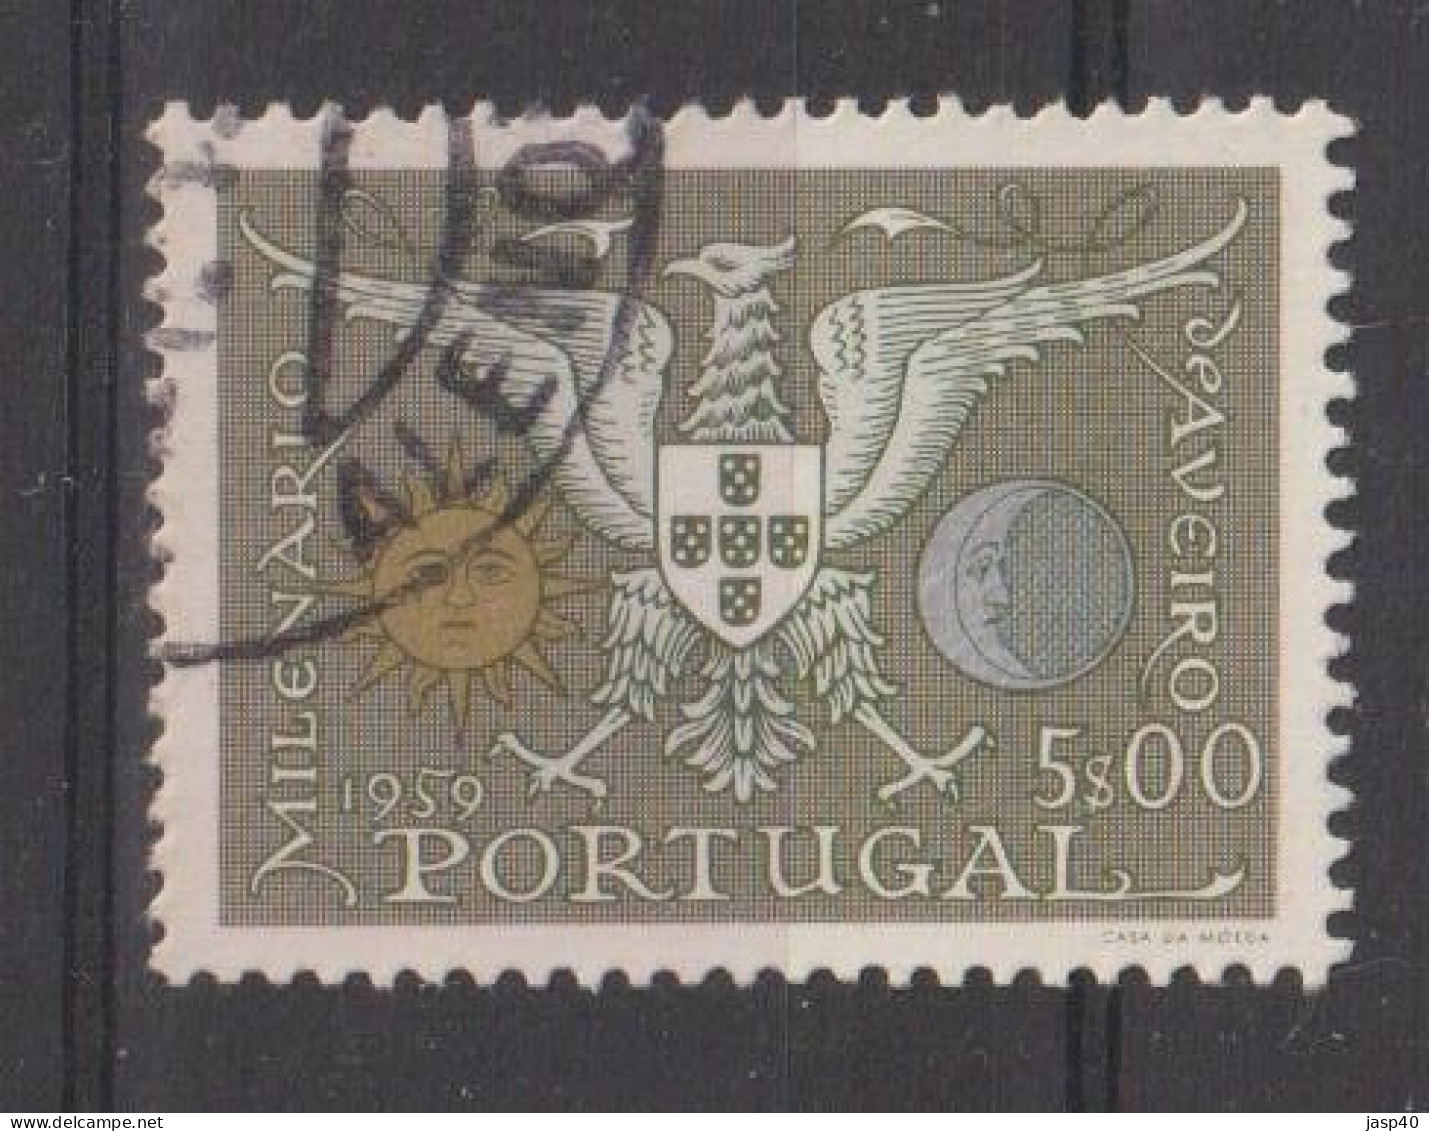 PORTUGAL 848 - POSTMARKS OF PORTUGAL - ALENQUER - Used Stamps